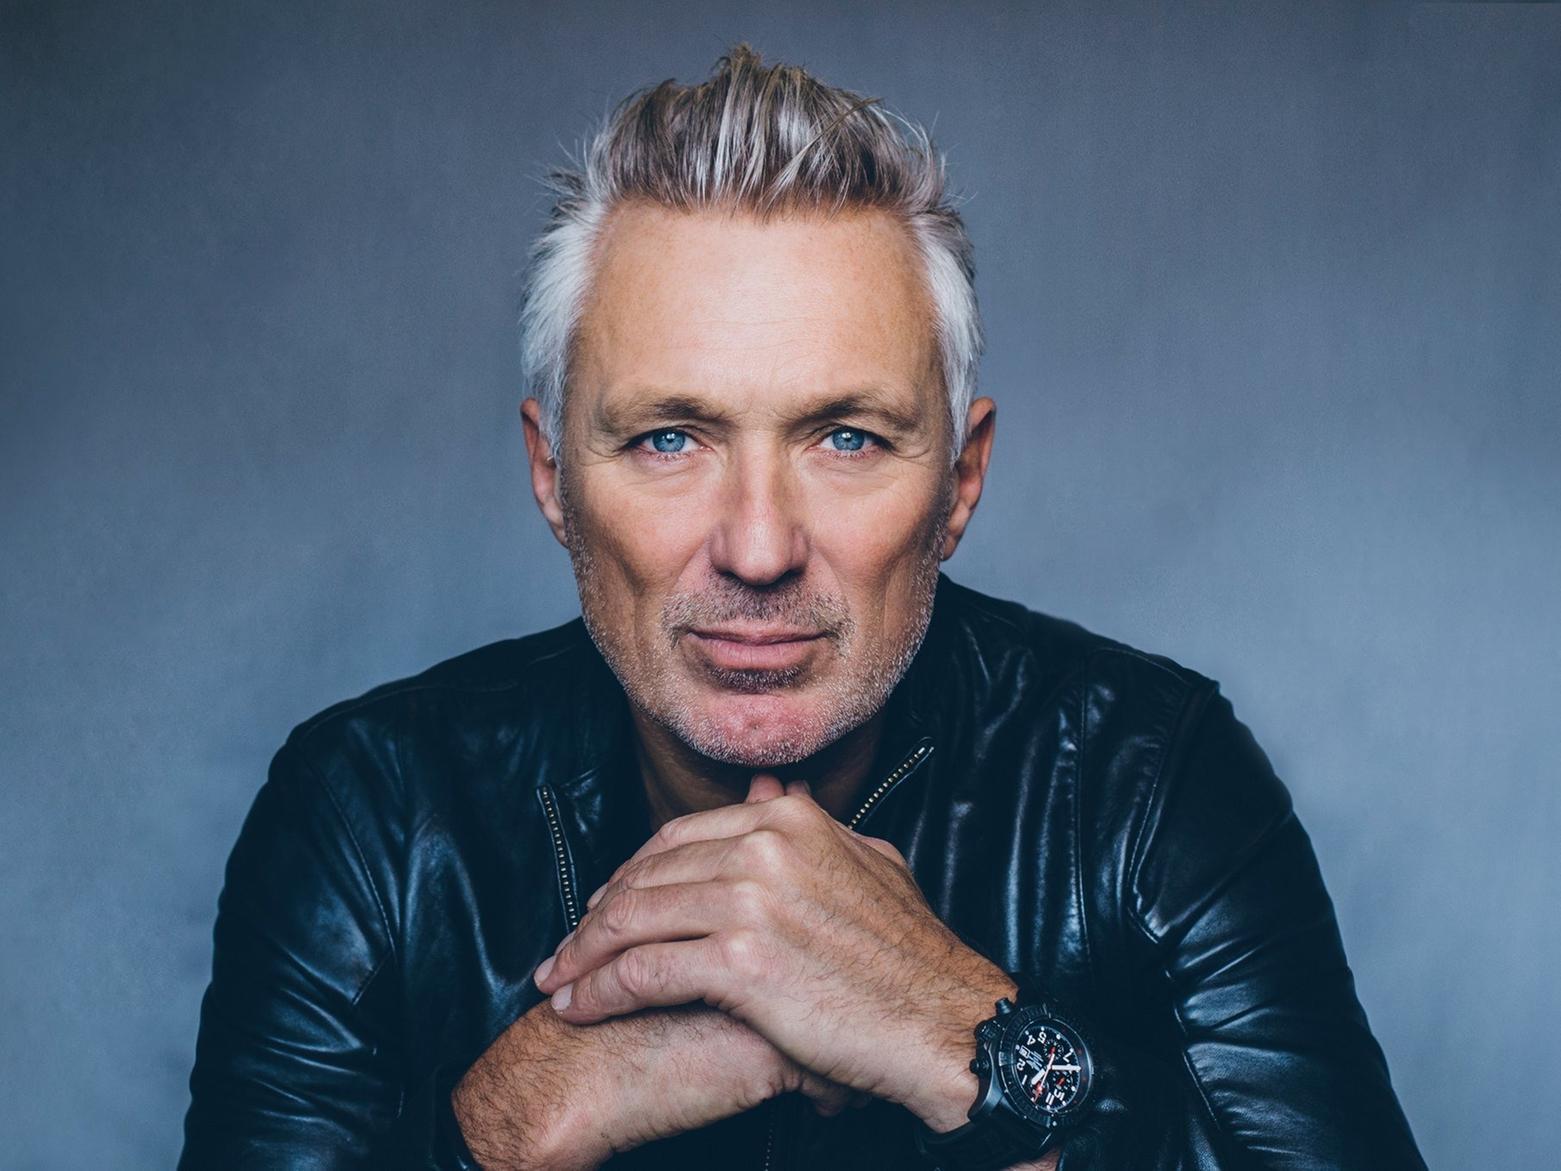 Former member of 80s band Spandau Ballet, Martin Kemp will be spinning the biggest and best hits of that decade at The Venue in Barisland on June 5. Early booking is essential for what is promised to be a Gold night.